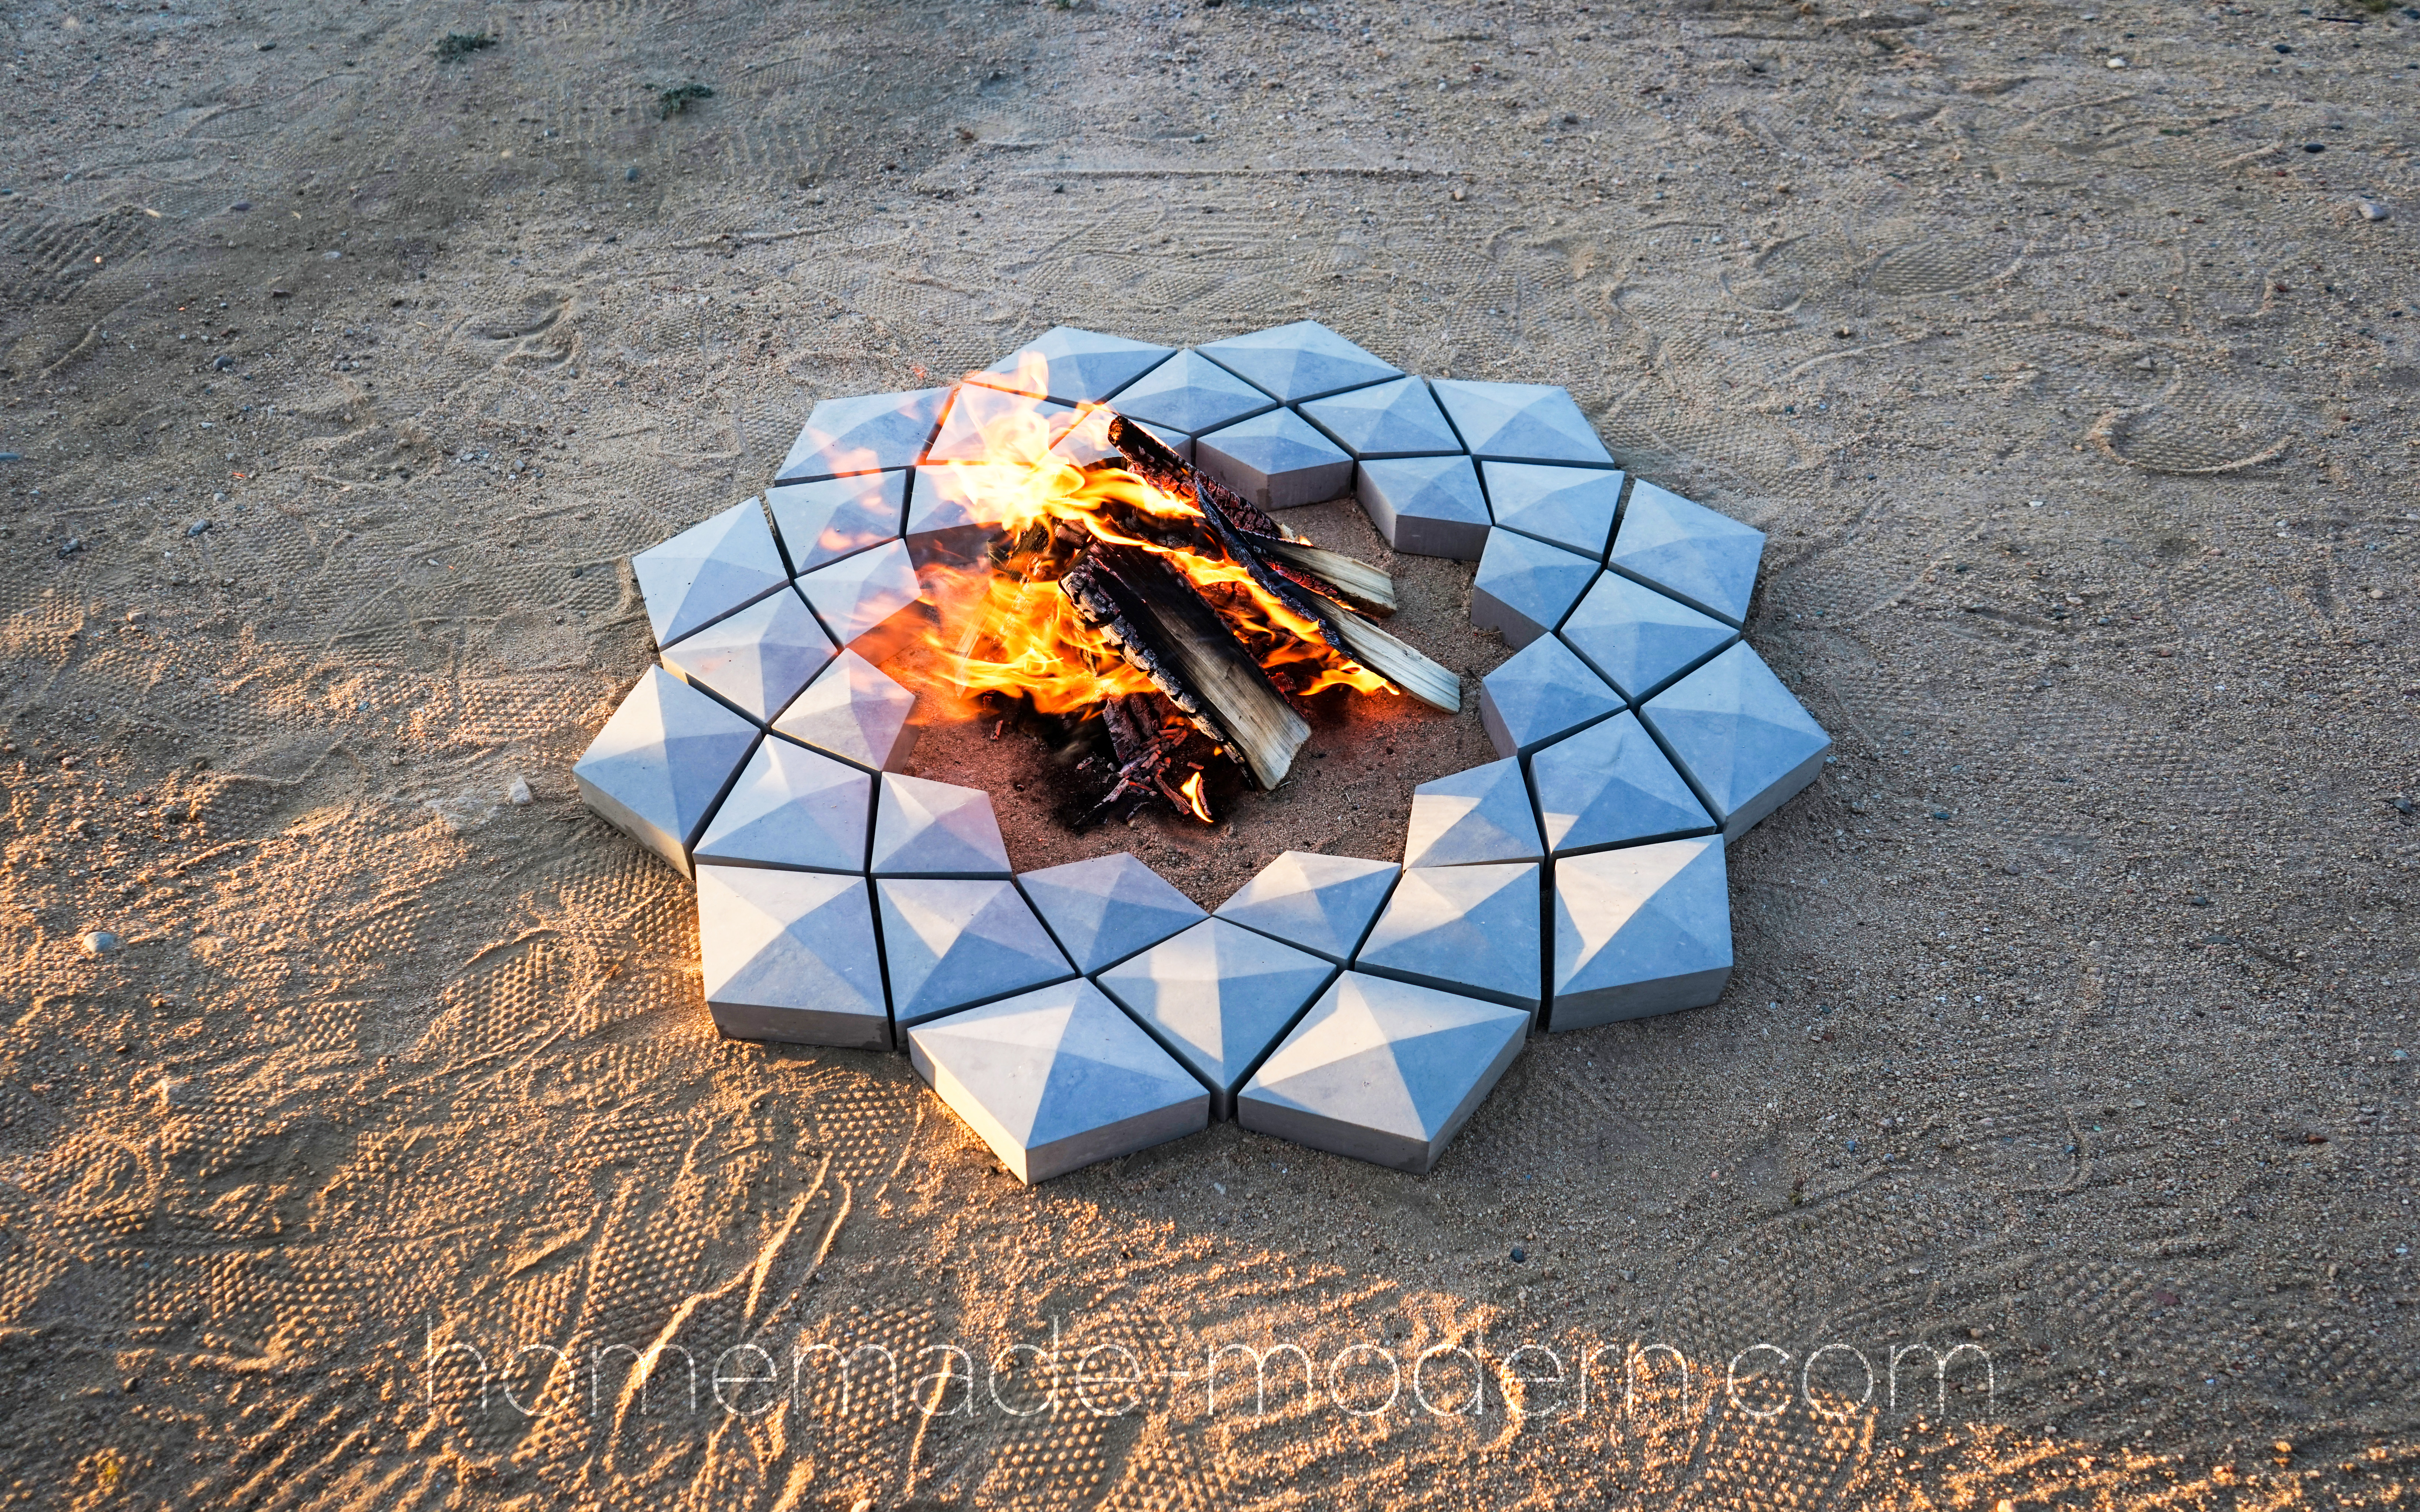 This 3D printed concrete fire pit was designed by Ben Uyeda of HomeMade-Modern.com You can download the 3D files for free and see a video showing the entire fabrication process. For more information go to HomeMade-Modern.com